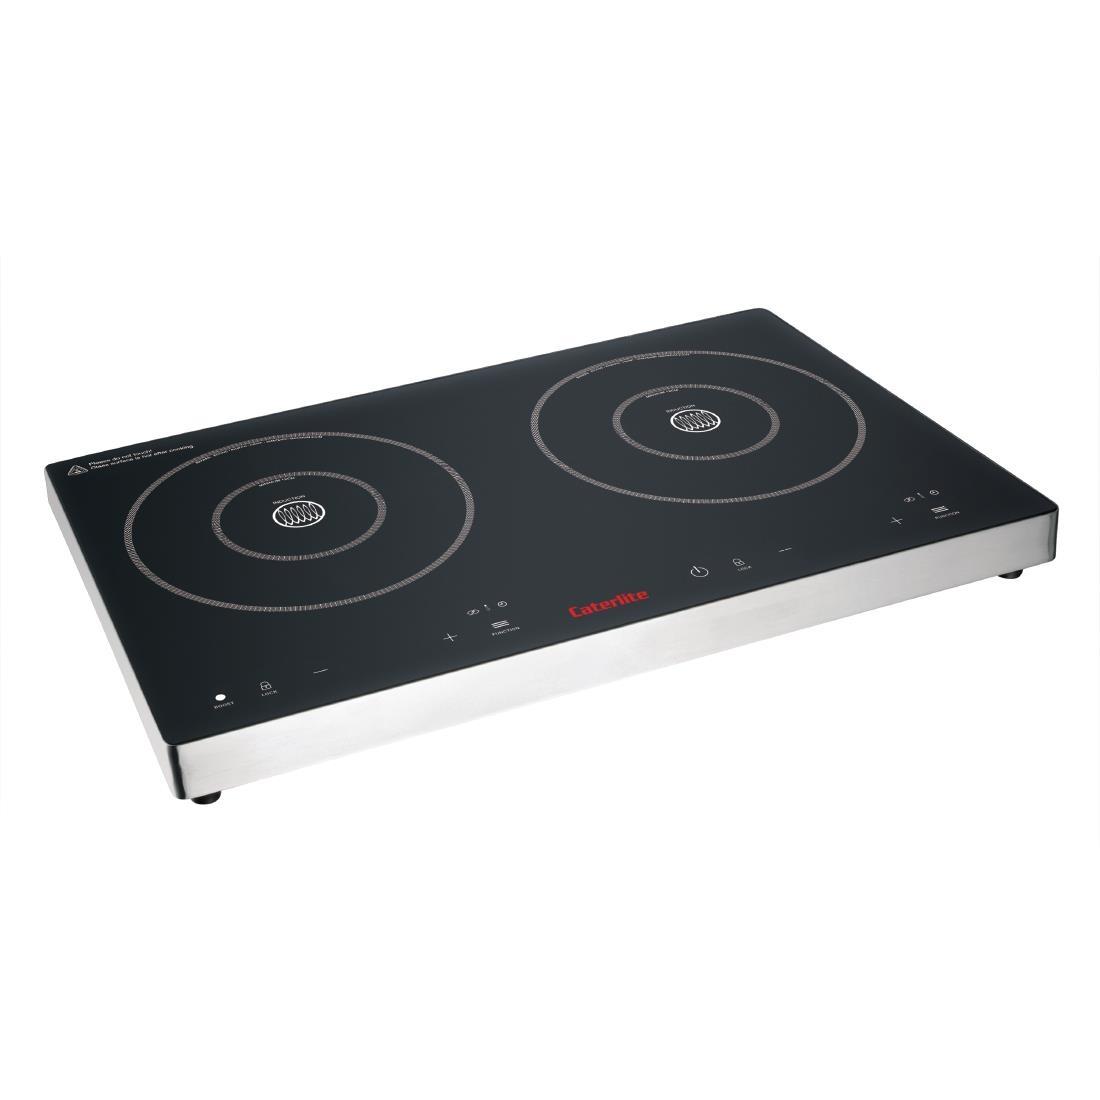 Caterlite Touch Control Double Induction Hob - DF824  - 1